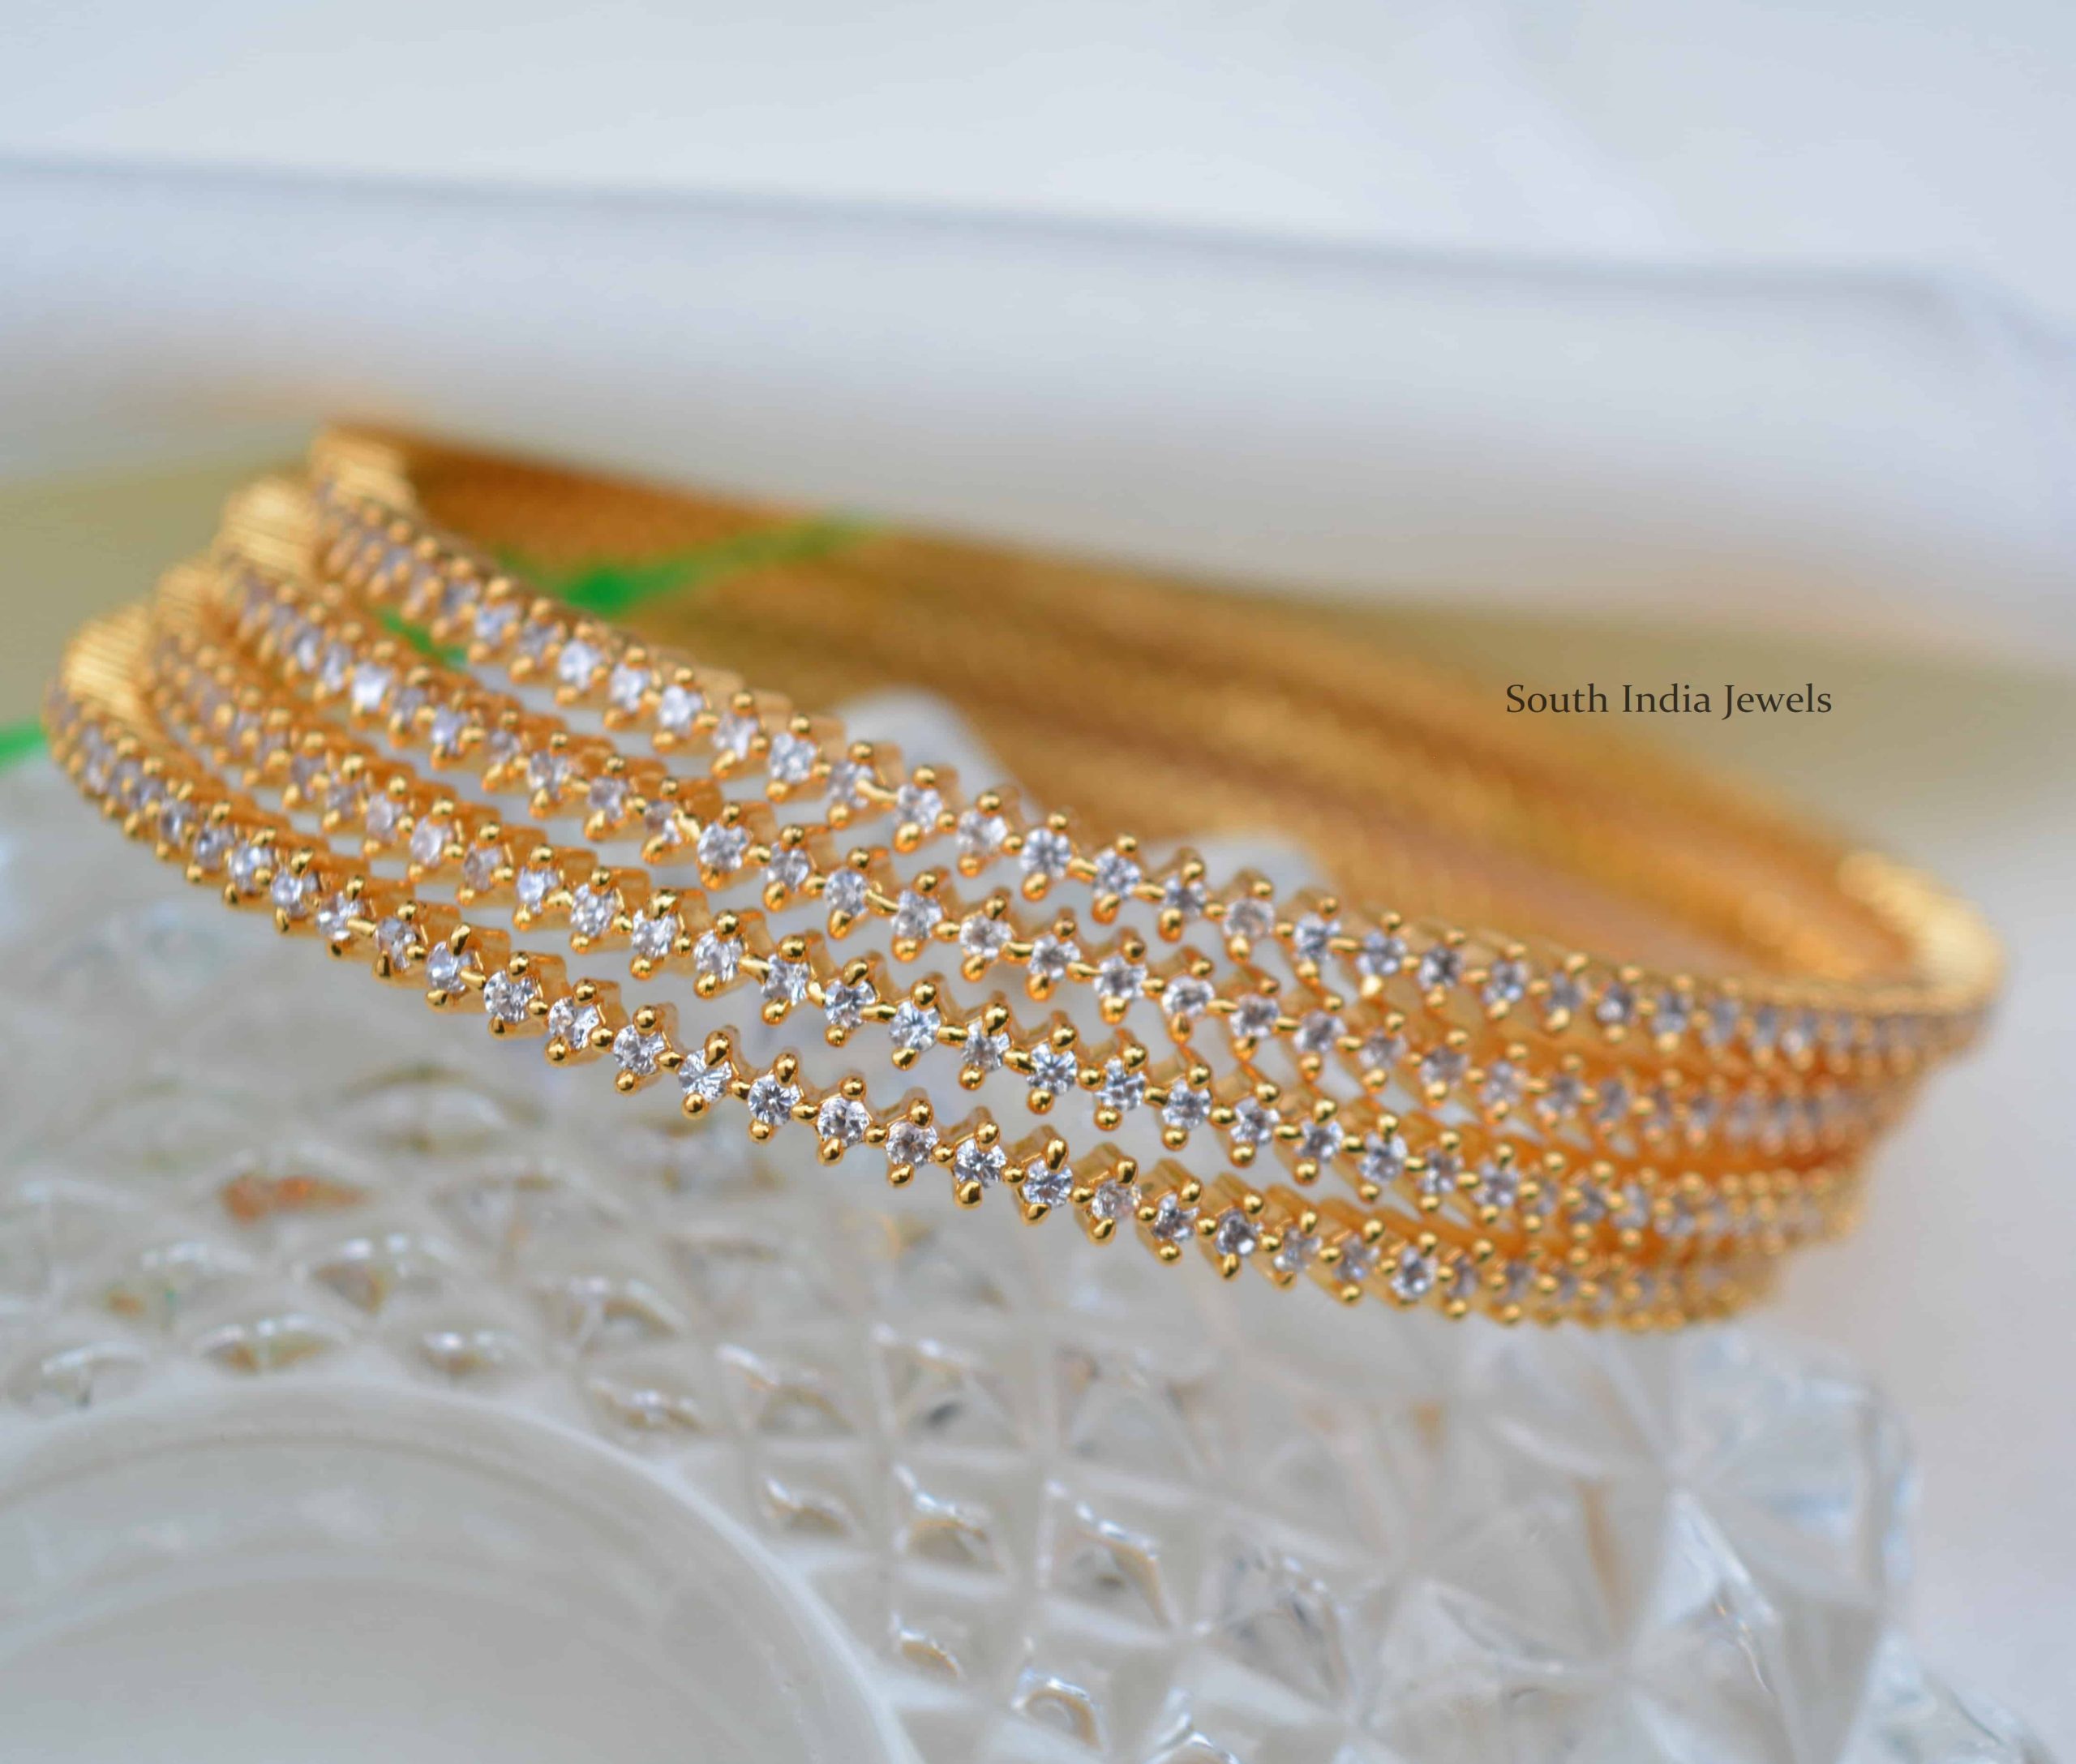 Imitation Jewellery Bangles Online Shopping - South India Jewels